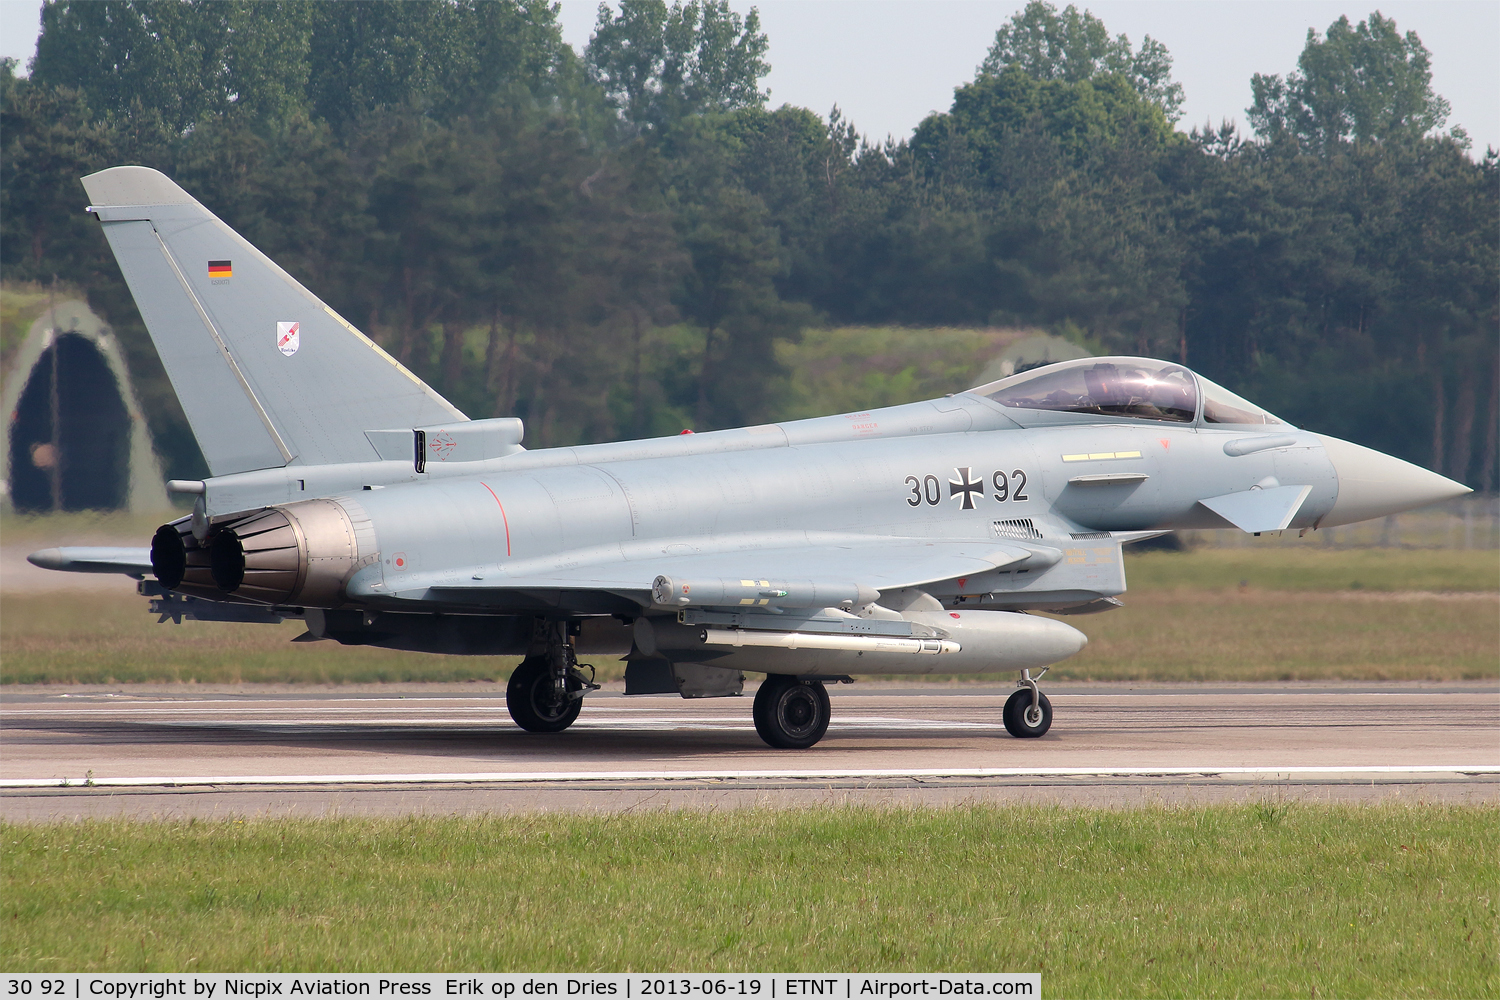 30 92, Eurofighter EF-2000 Typhoon S C/N GS071, 3092 seen here on the runway of Wittmund AB